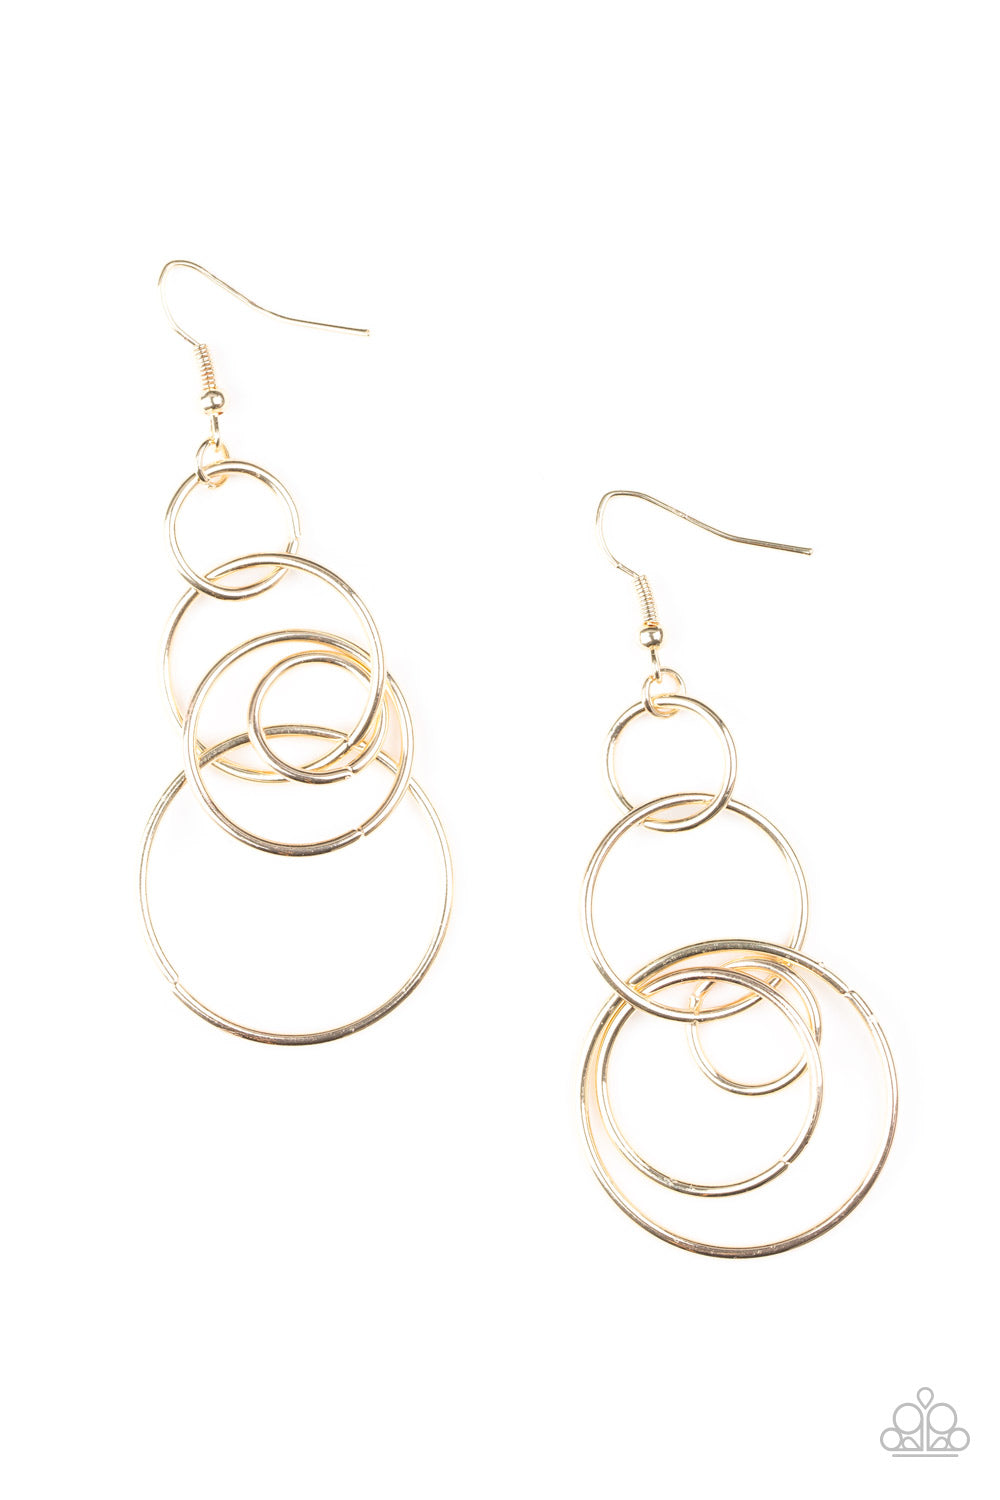 Chic Circles Gold Paparazzi Earrings Cashmere Pink Jewels - Cashmere Pink Jewels & Accessories, Cashmere Pink Jewels & Accessories - Paparazzi